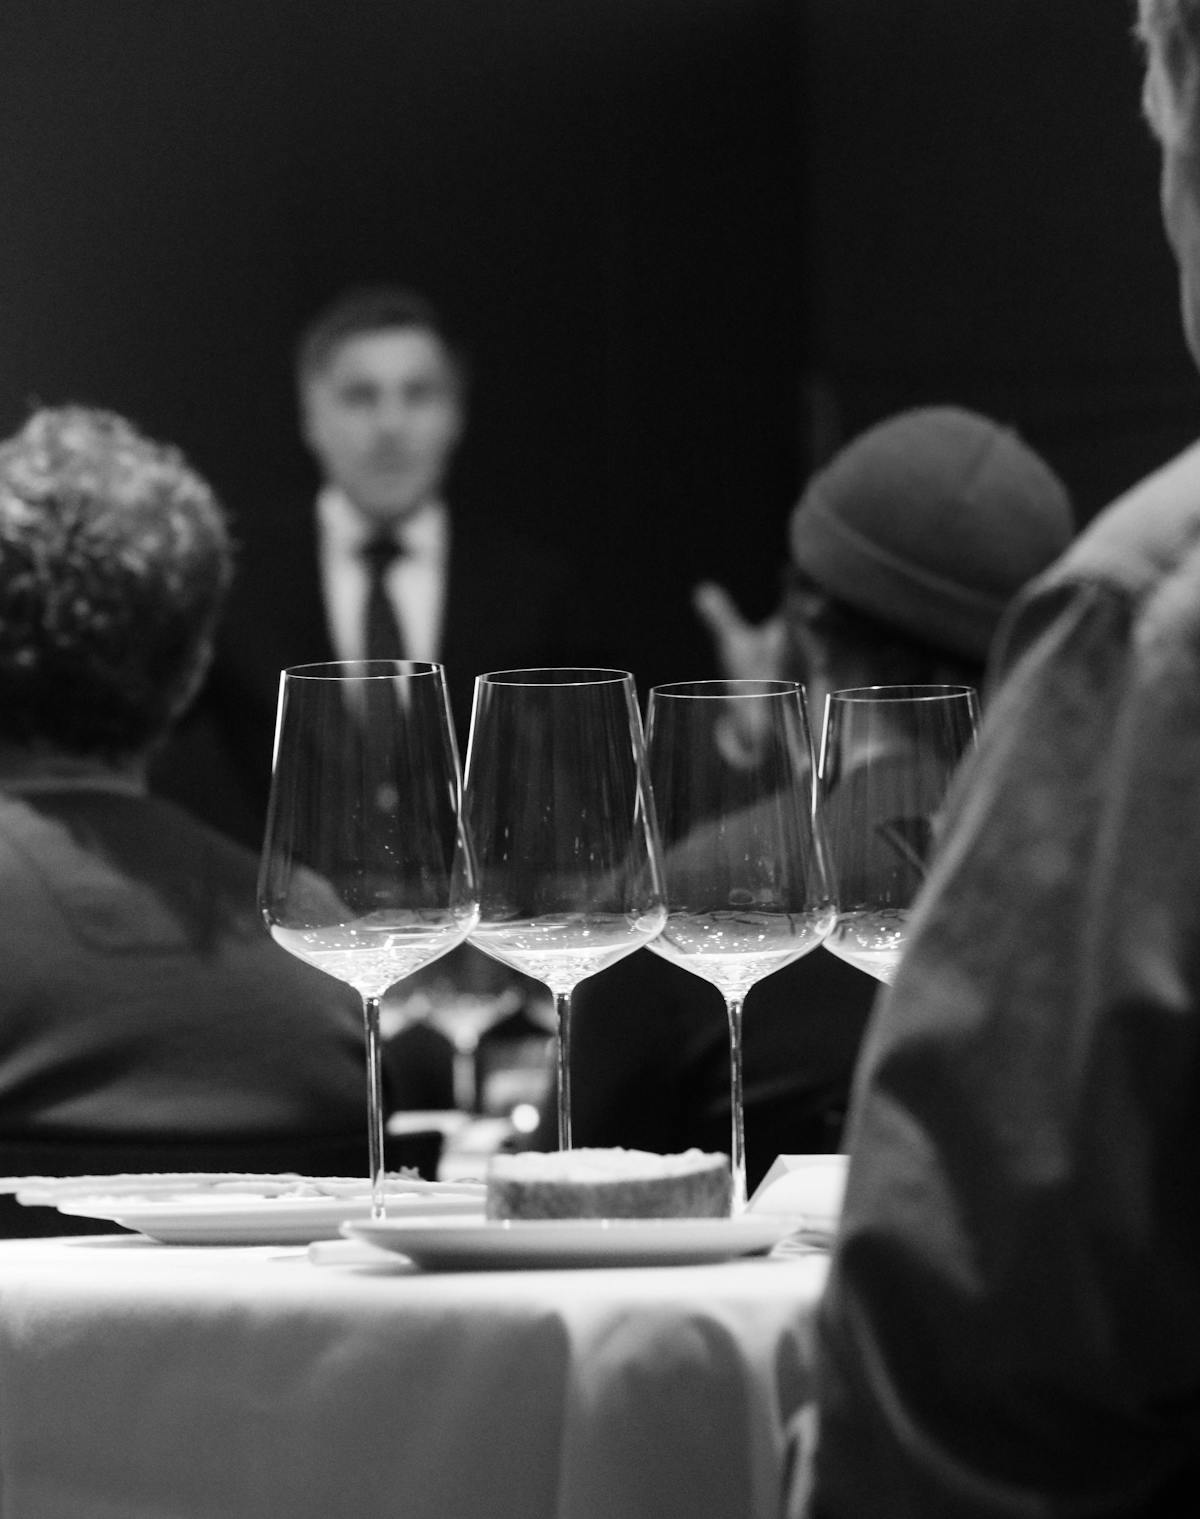 a person sitting at a table with wine glasses